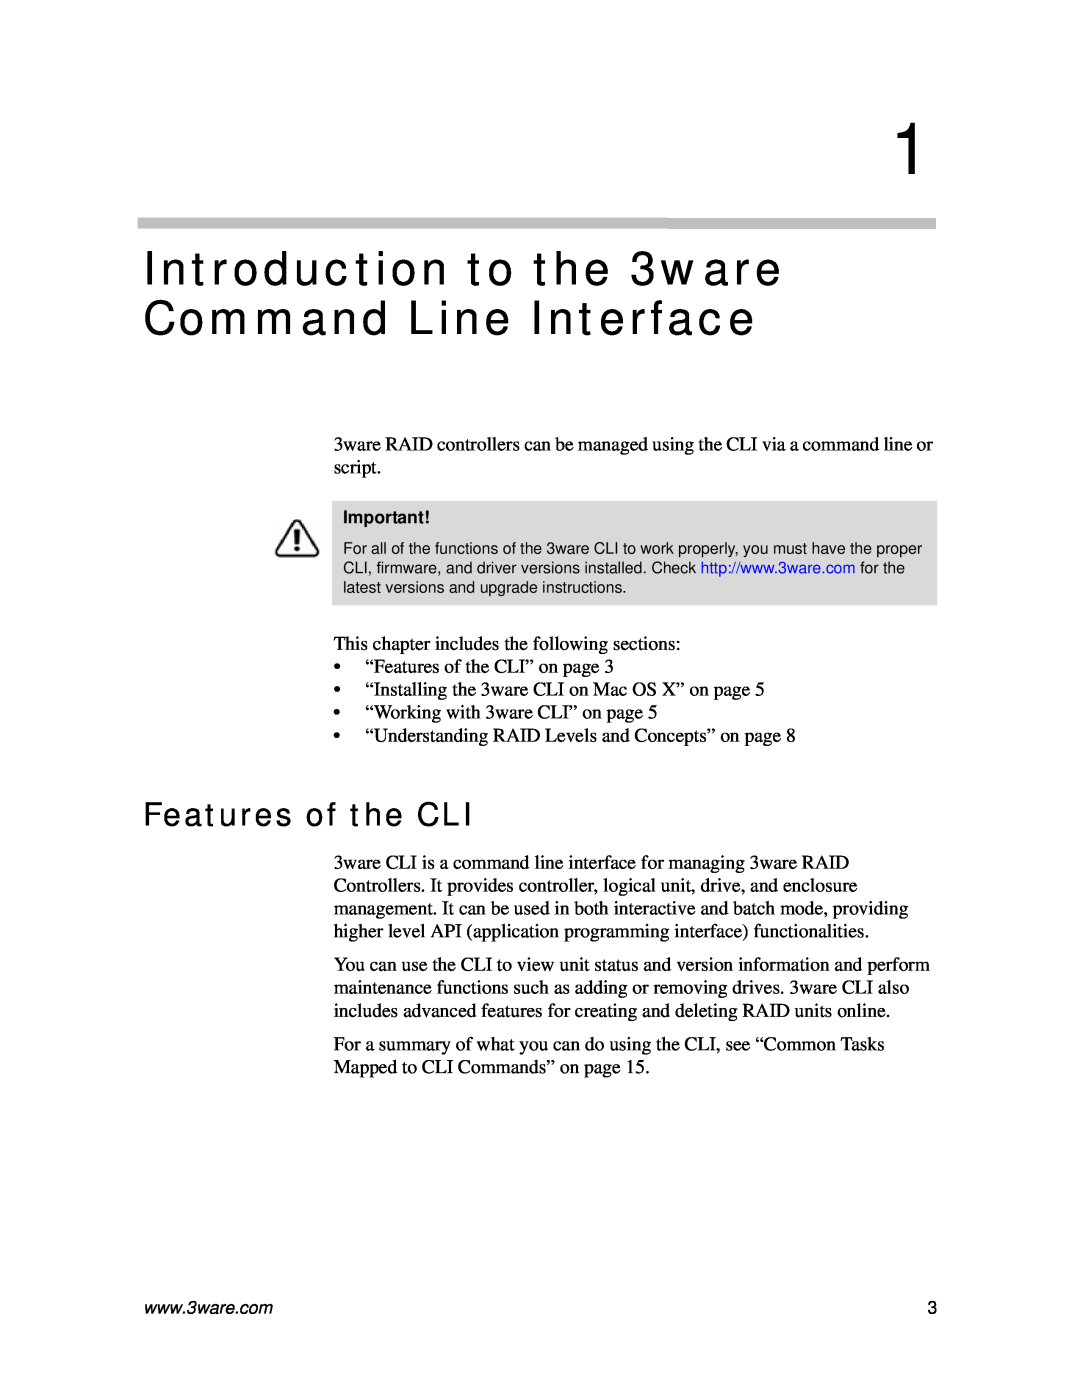 AMCC 9590SE-4ME manual Introduction to the 3ware Command Line Interface, Features of the CLI 